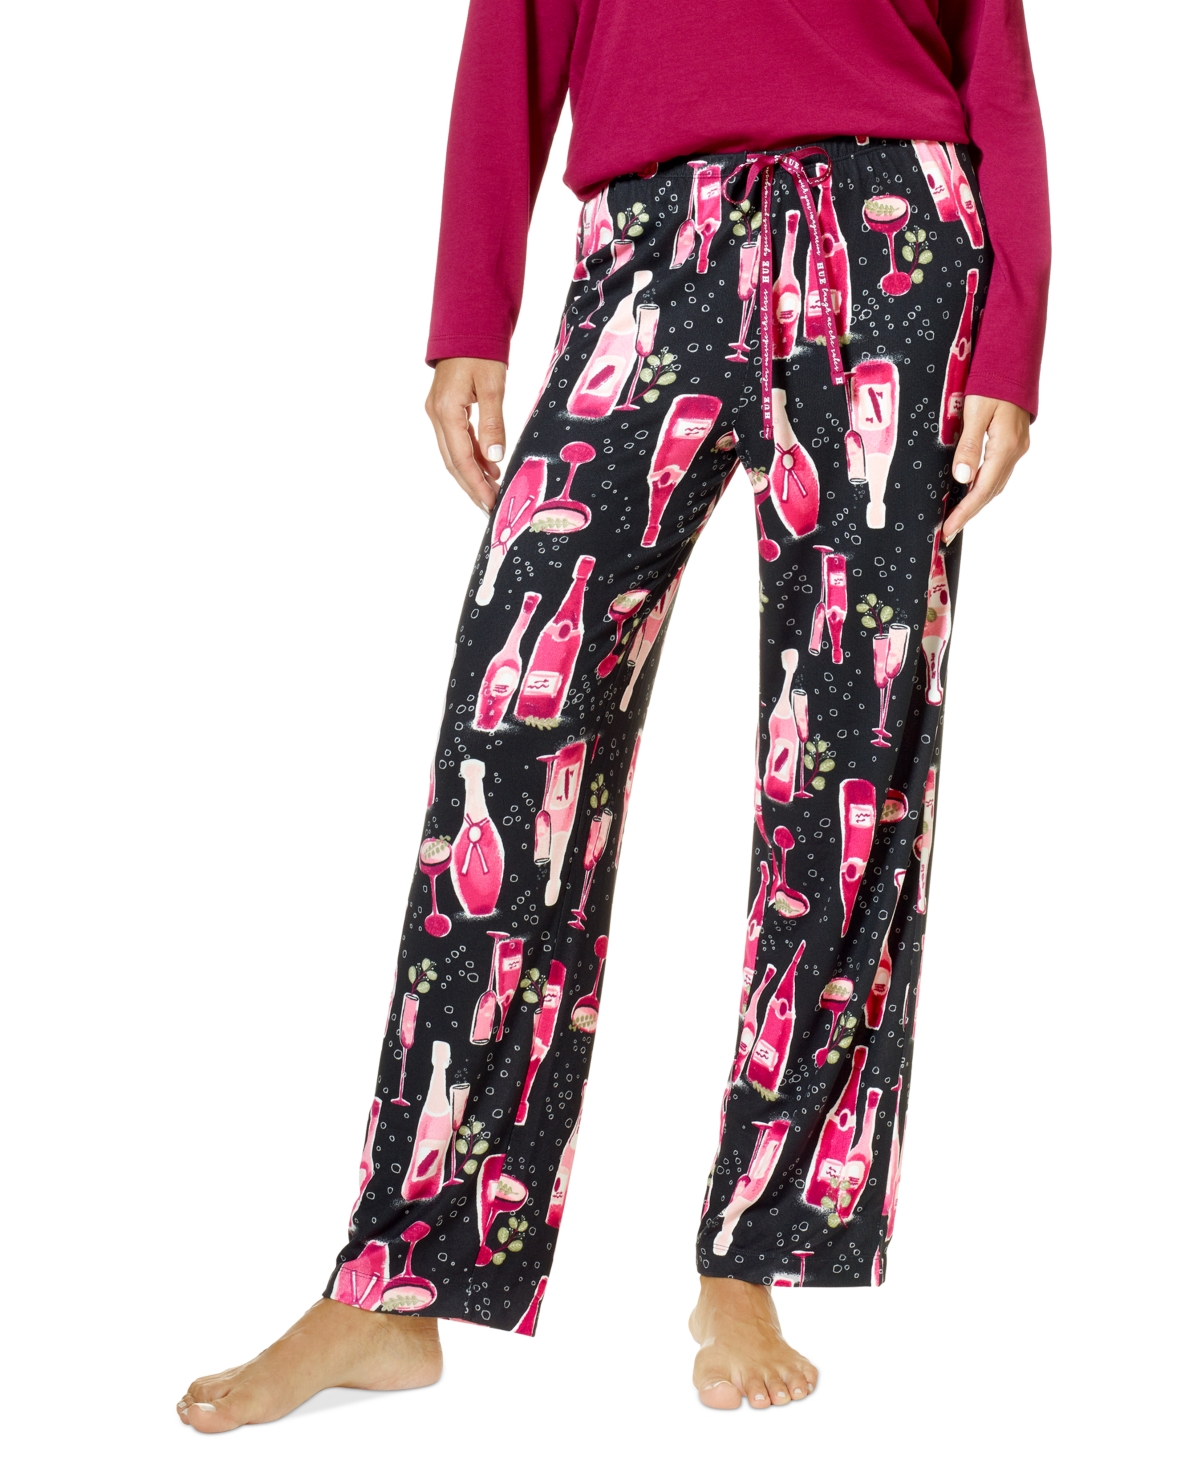 Hue Women's Printed Pajama Pants In Black Bubbly